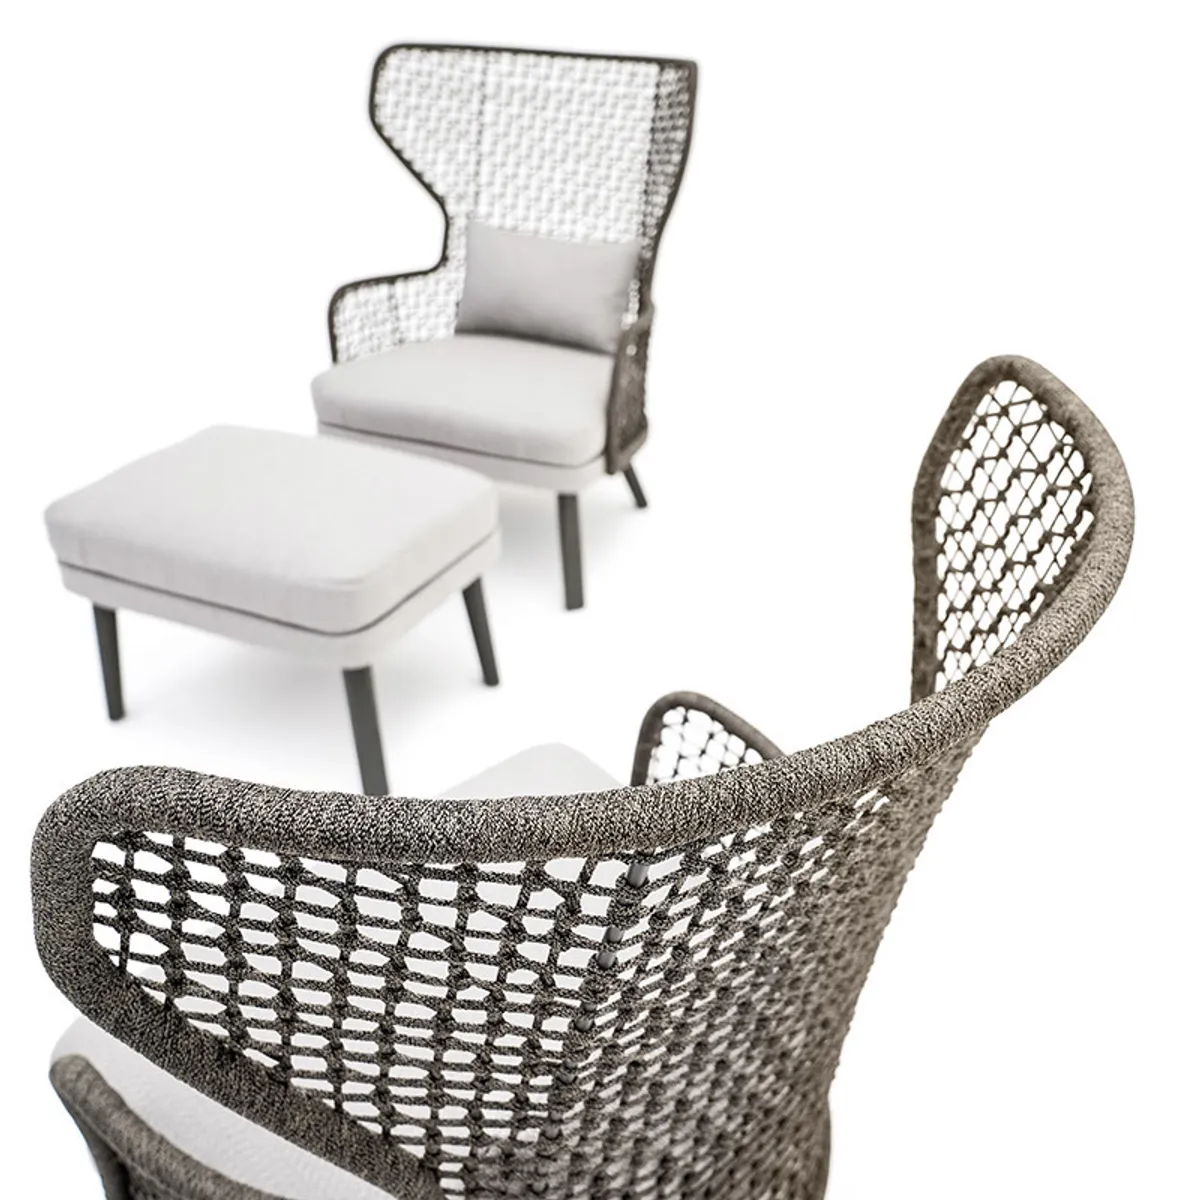 Emma High Back Chair Outdoor Hotel Lounge Inside Out Contracts 4